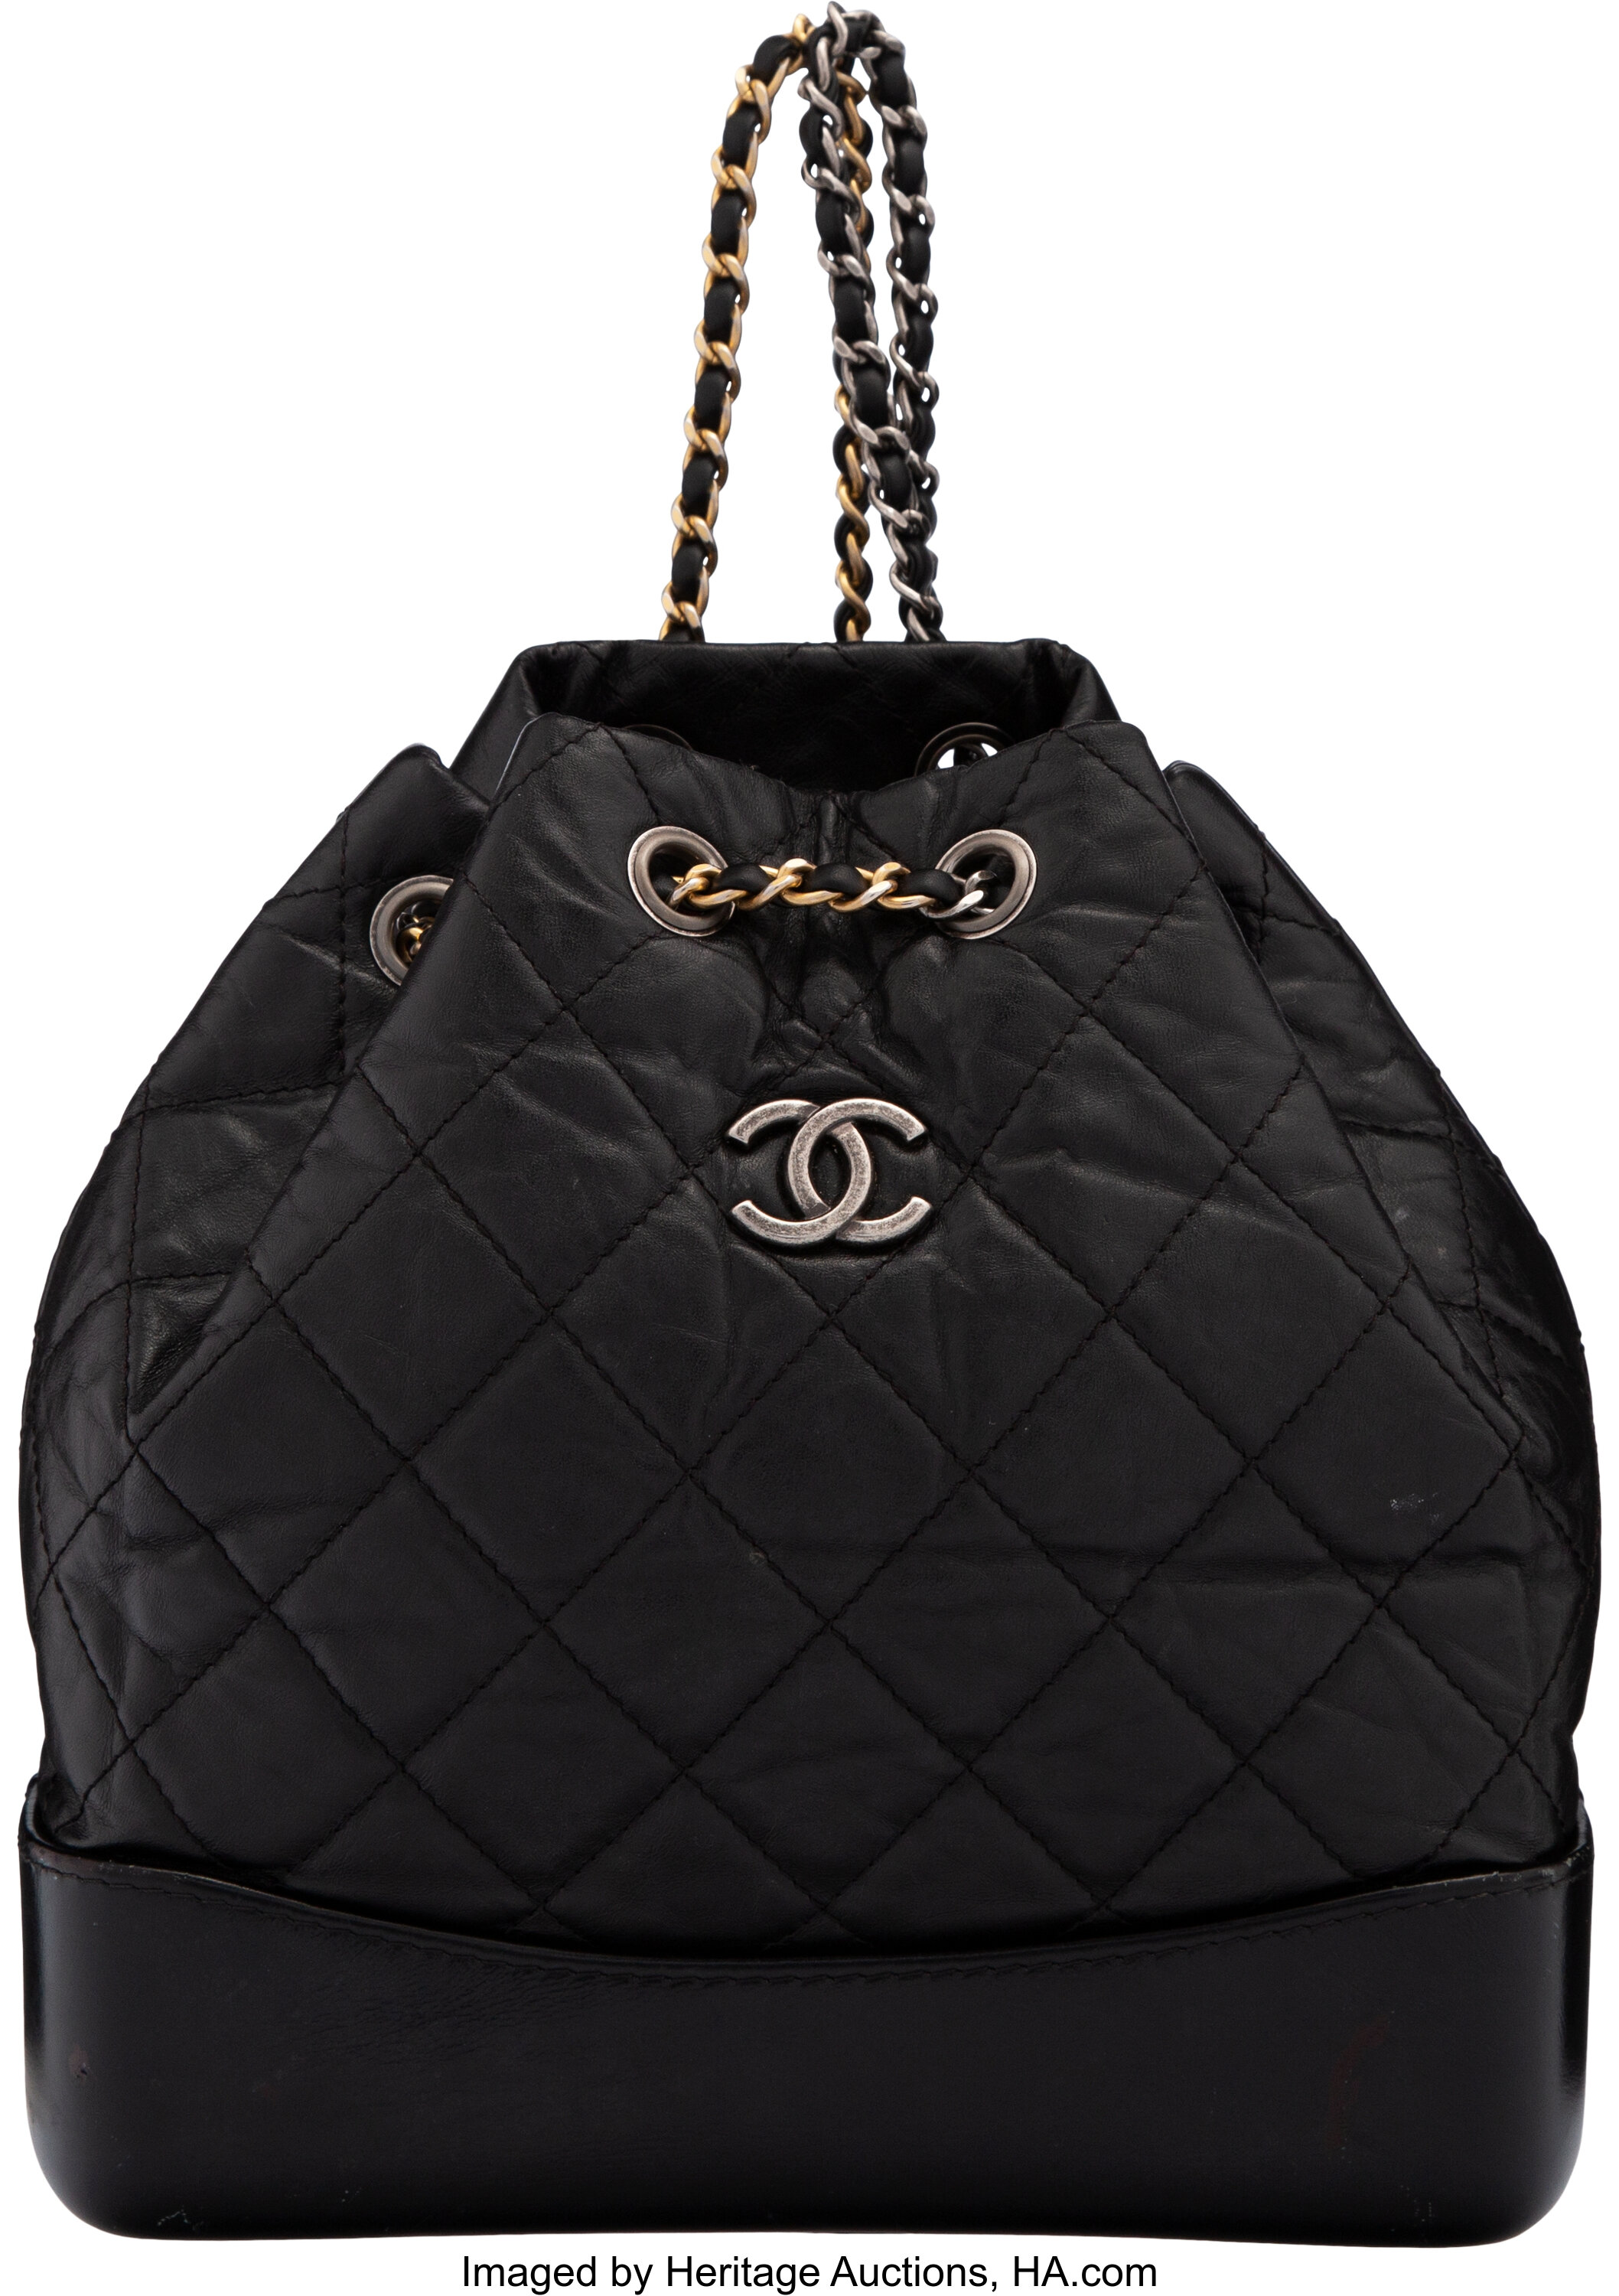 Chanel Black Aged Calfskin Gabrielle Backpack with Mixed Hardware., Lot  #58067